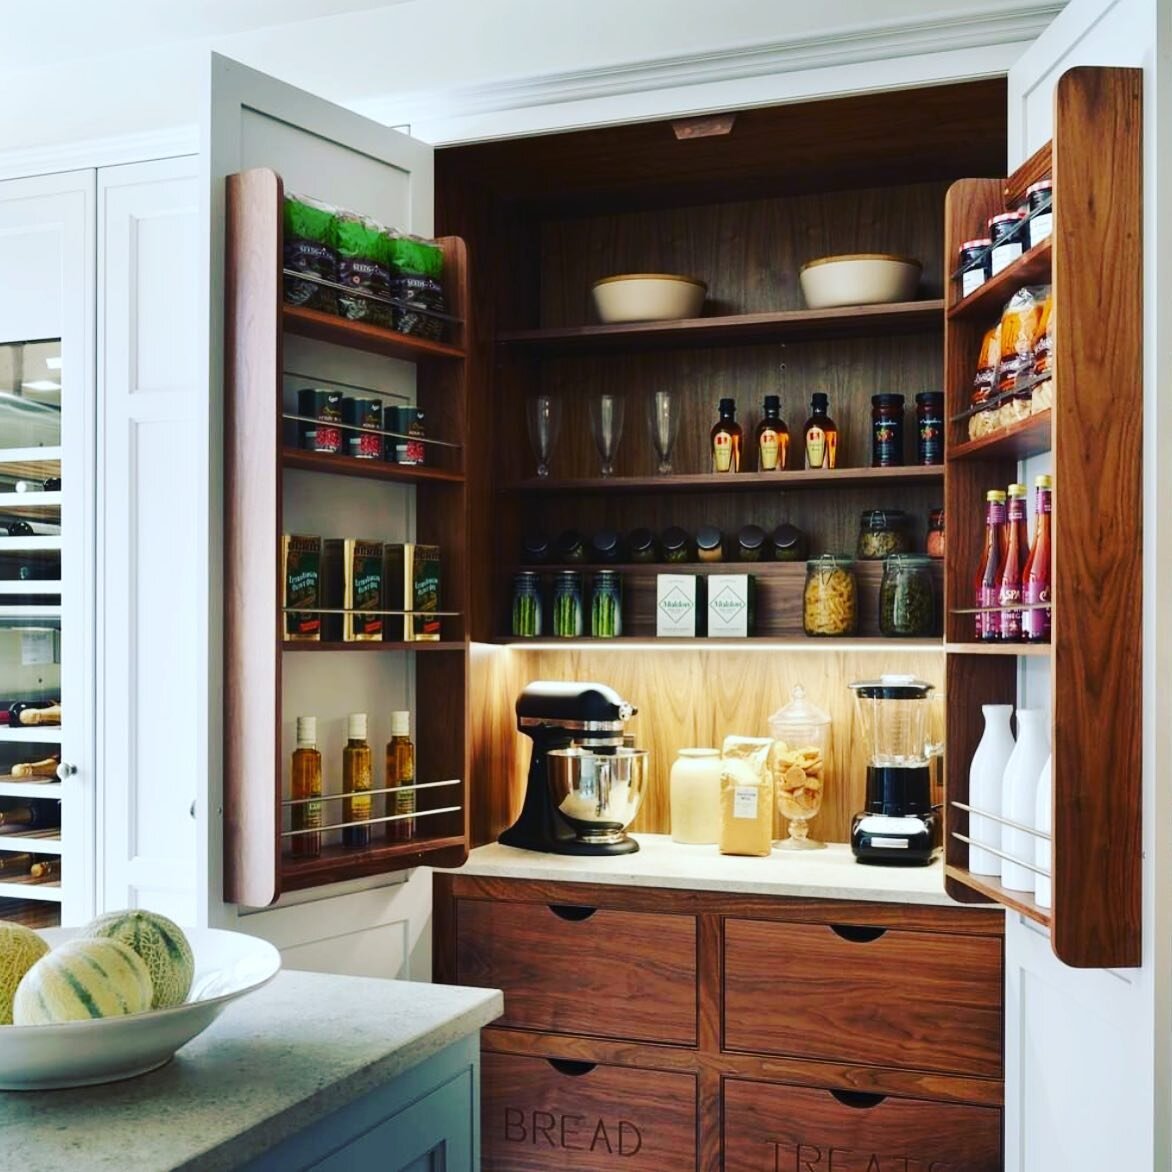 I feel a cabinet/pantry revolution coming&hellip;